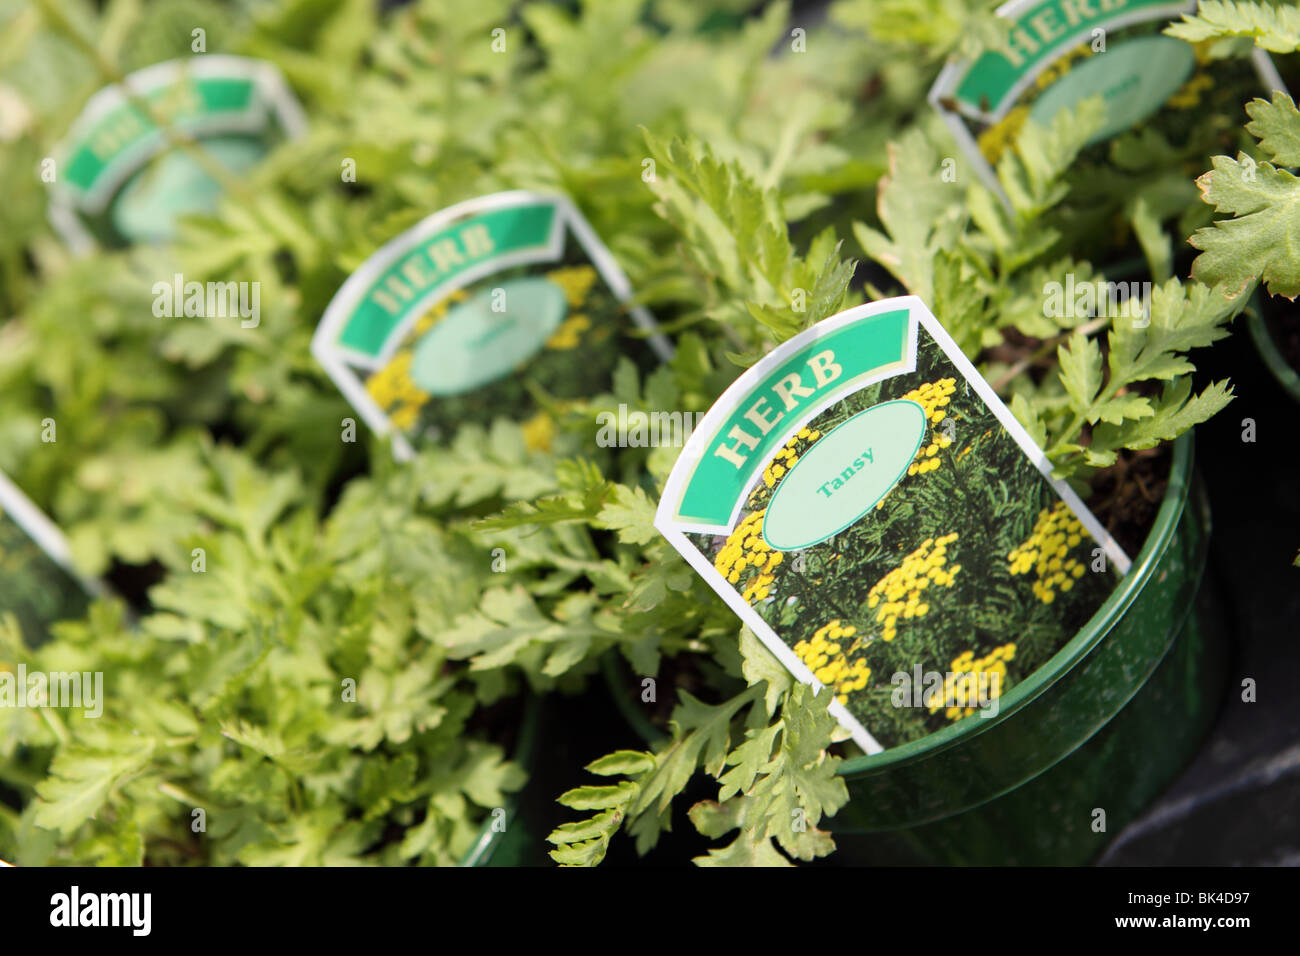 Tansy Tanacetum vulgare herb plant plants for sale at a nursery garden centre Stock Photo